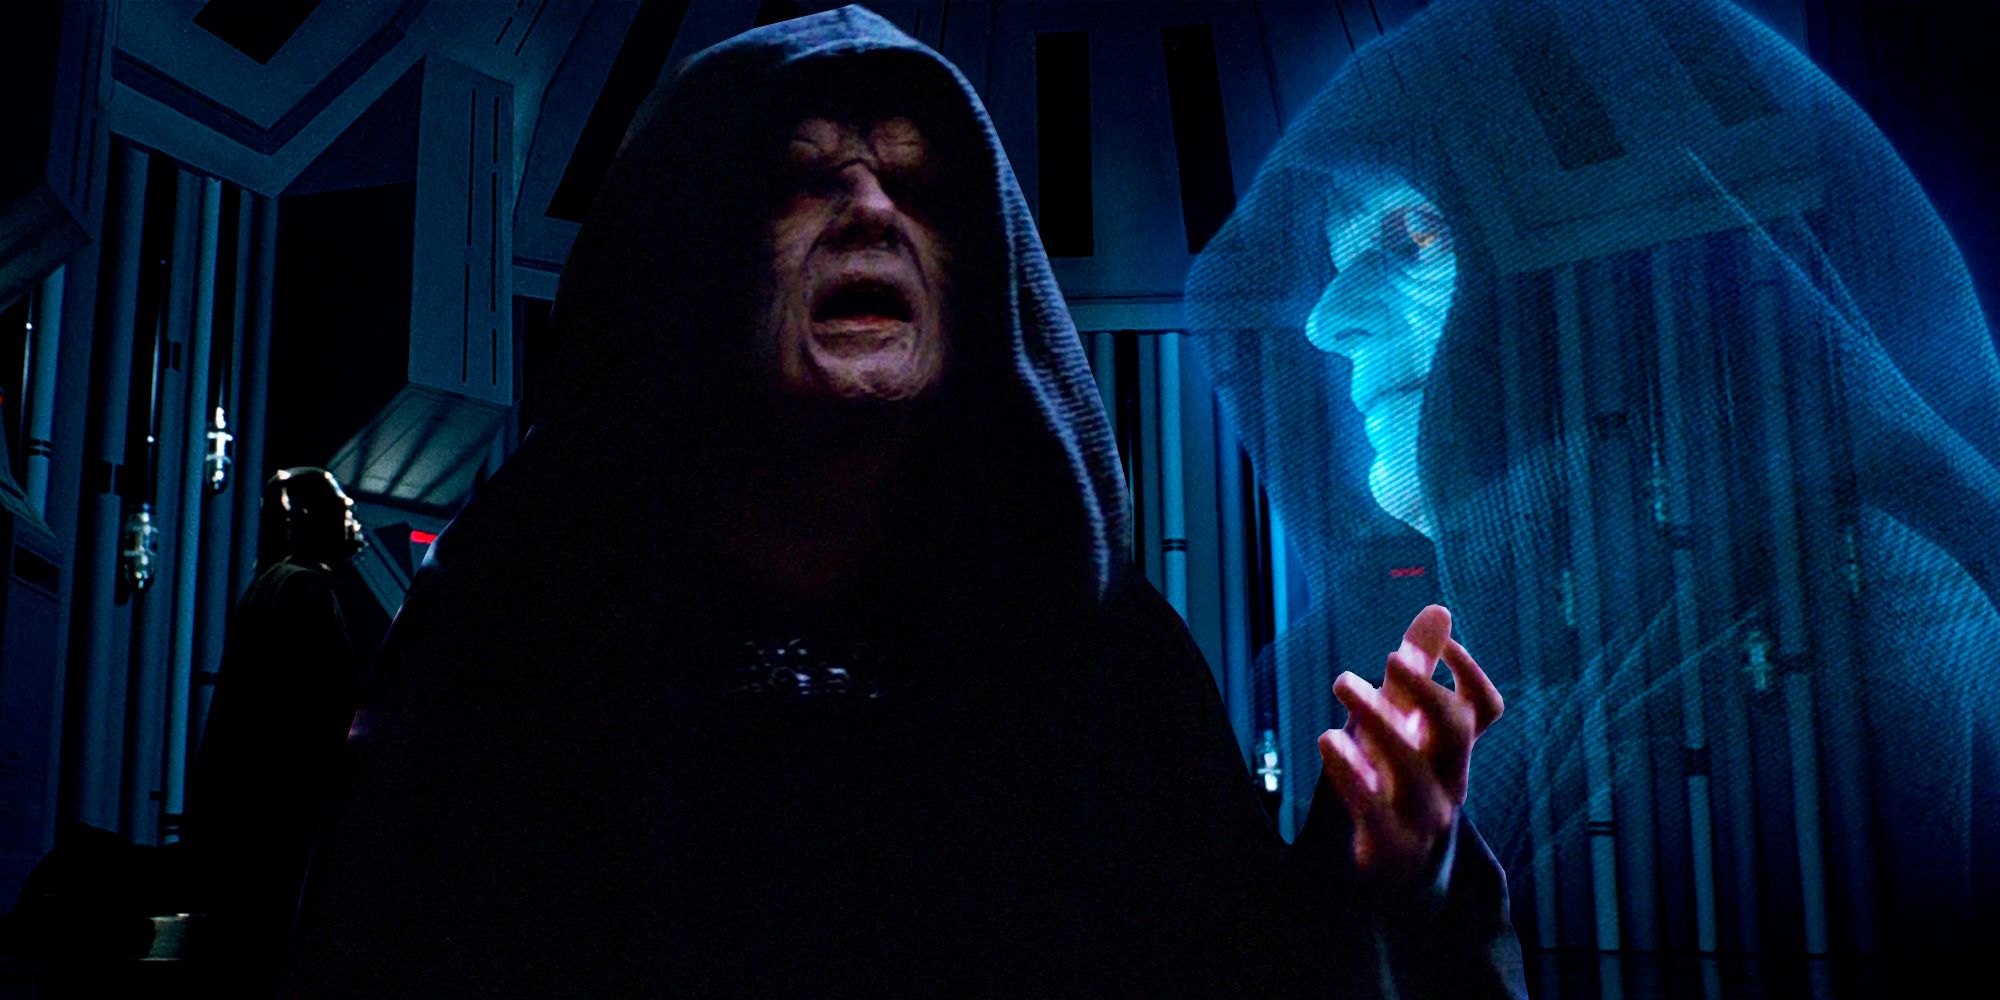 Only 1 Live-Action Disney Star Wars Project Has Recaptured What Made Palpatine So Good In The Original Trilogy